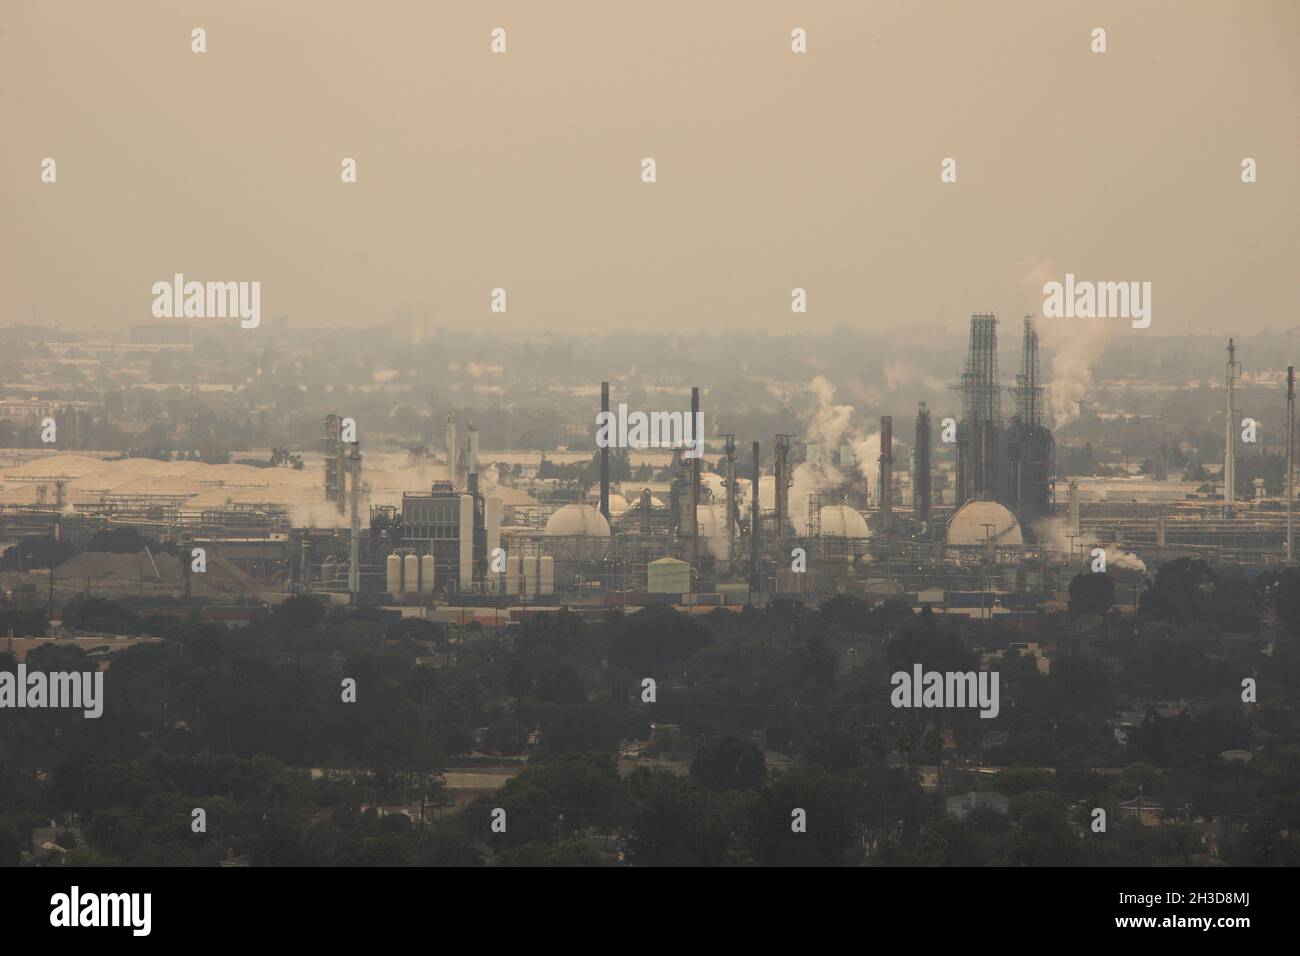 Global warming emissions from oil refining pollute the sky with C02. Stock Photo